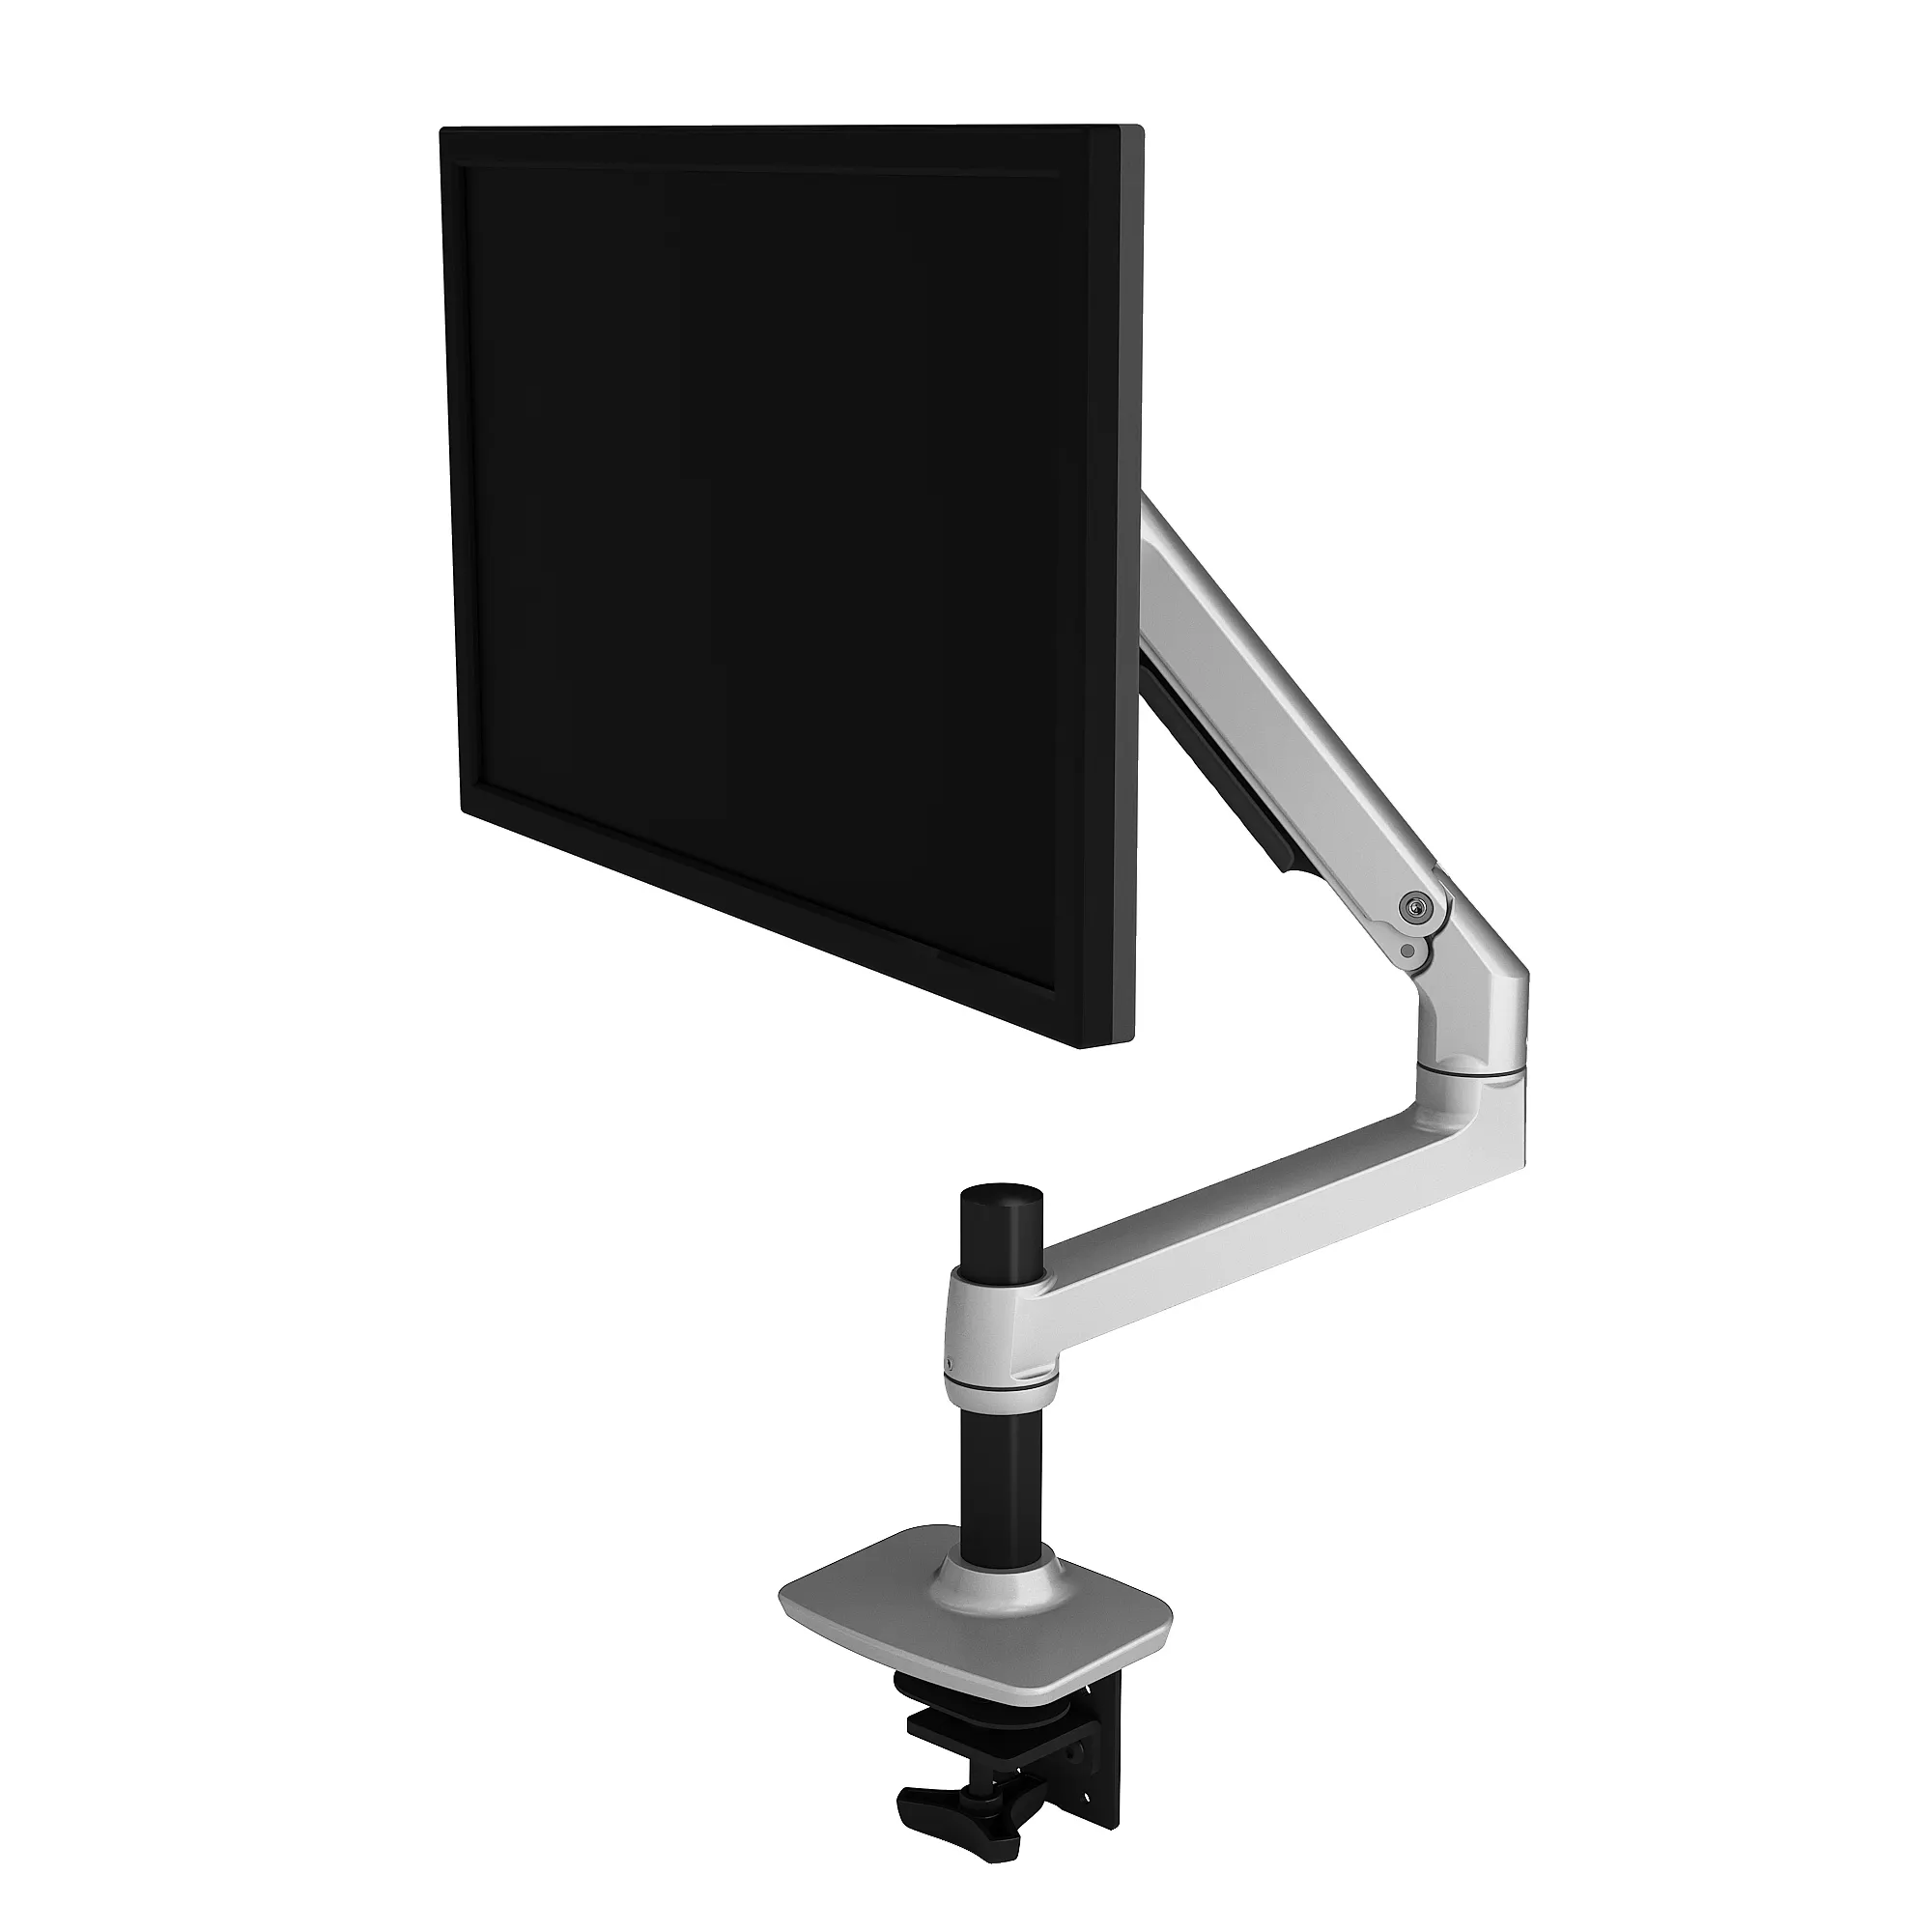 Mechanical Spring Single Lcd Monitor Mount Arm Desktop Stand for 10"-32" Computer ScreenMount Arm Height Adjust 10 Years CN ZHE